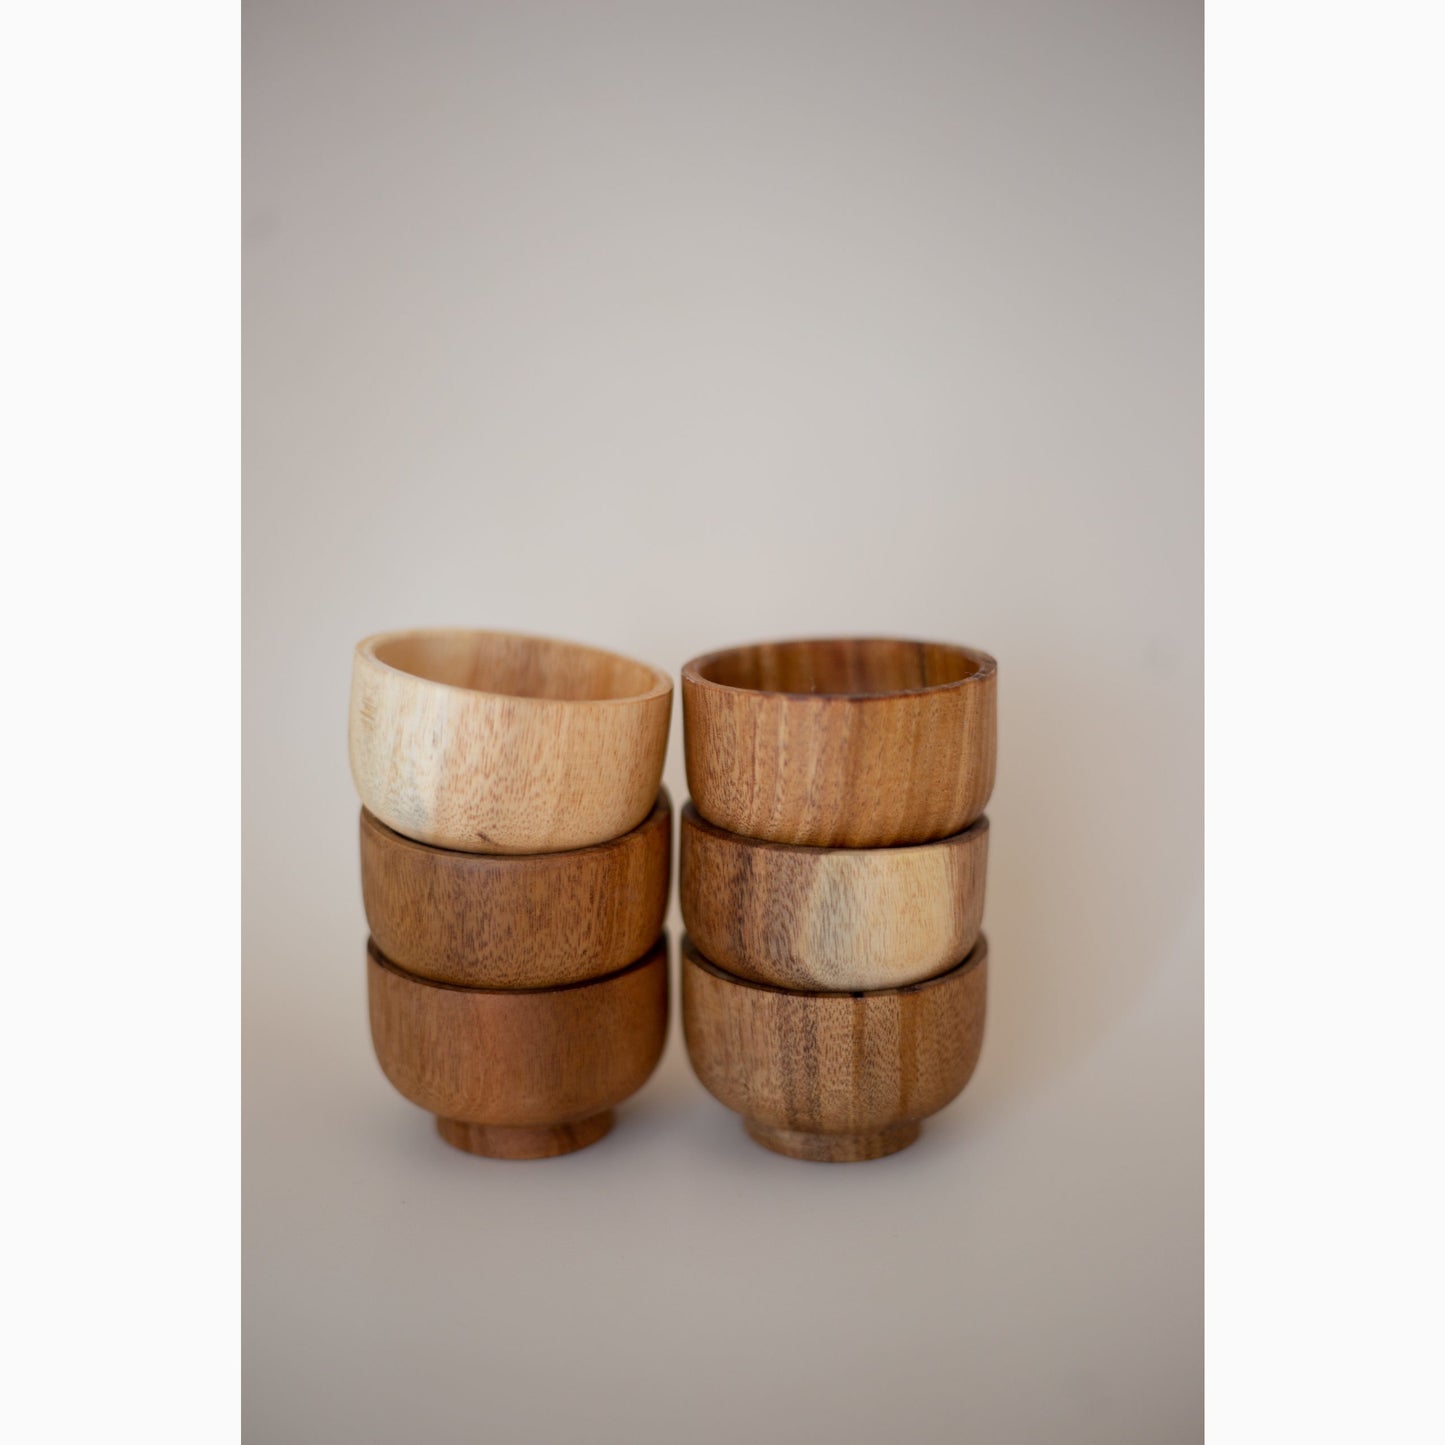 Acacia Wood Miniature Bowls Set for Open-Ended Play, Set of 6